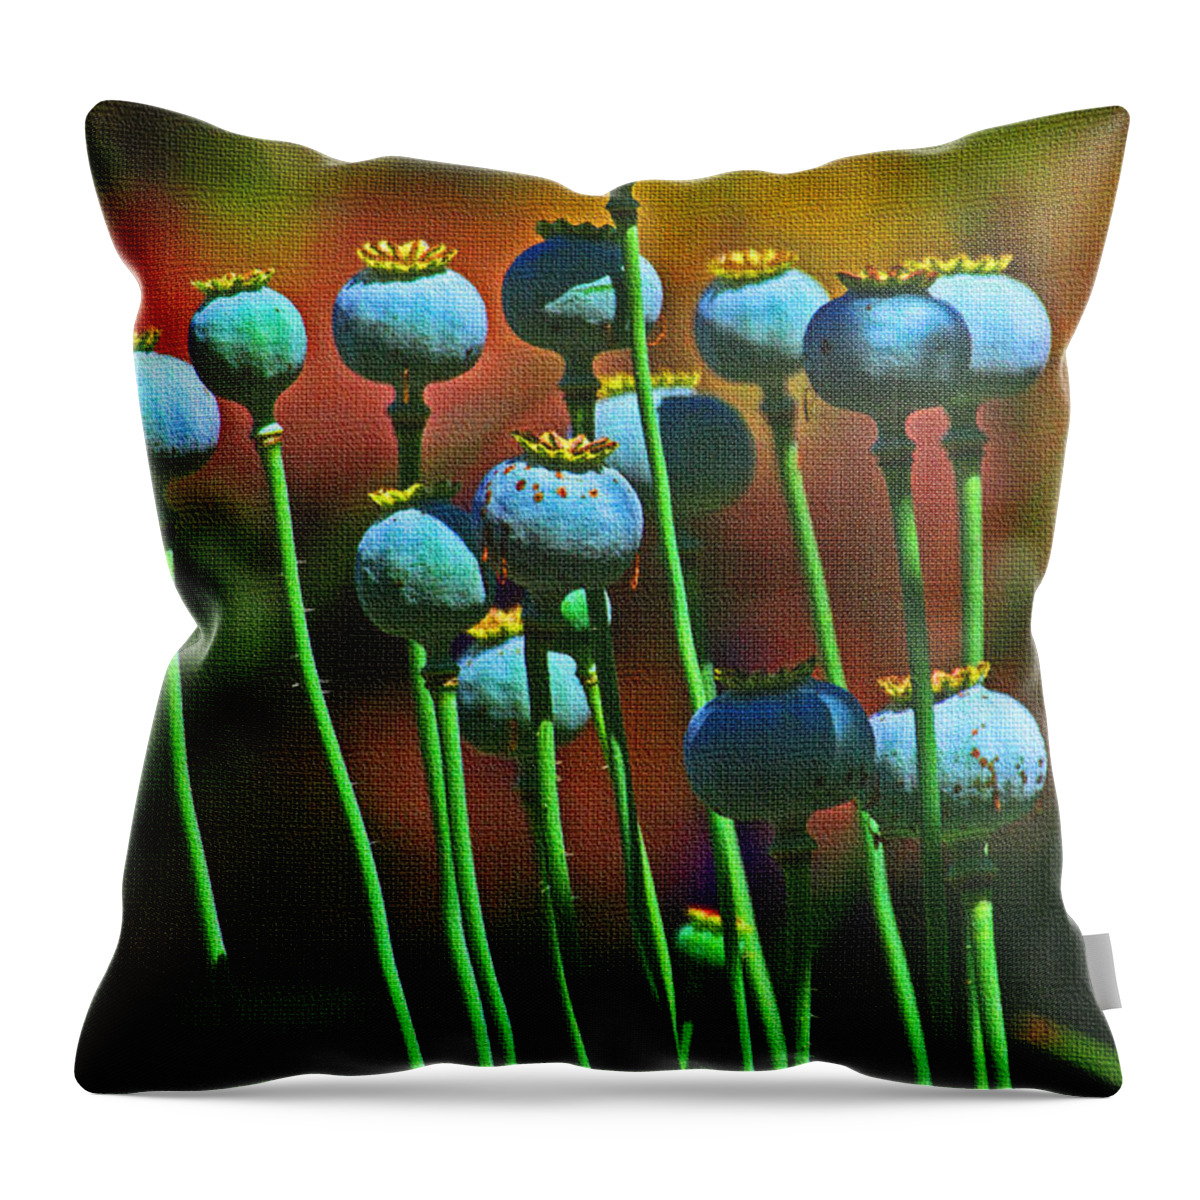 Poppy Seed Pods Throw Pillow featuring the photograph Poppy Seed Pods by Tom Janca